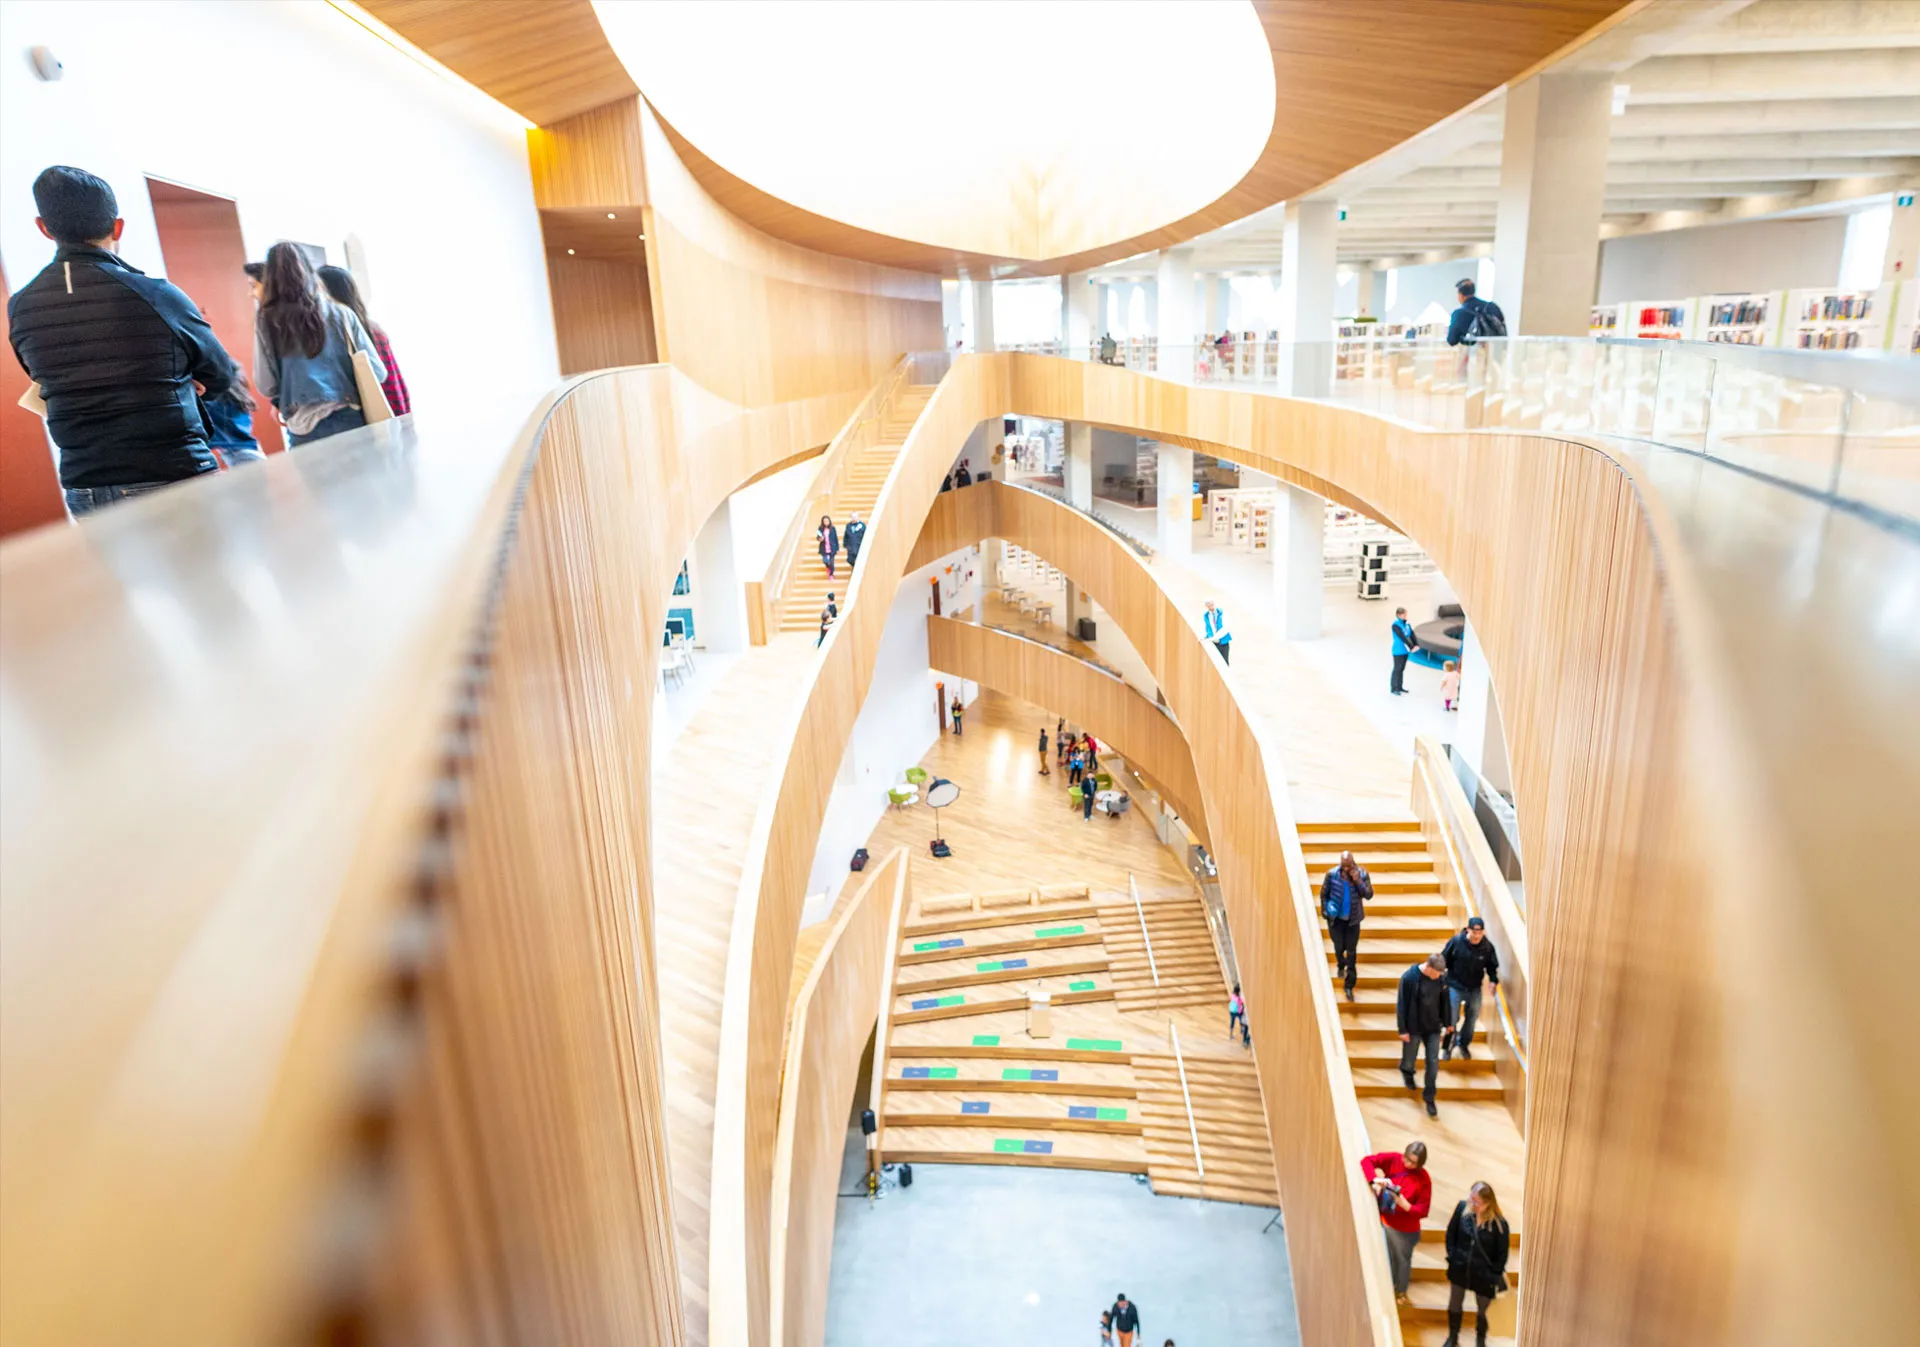 Calgary’s New Central Library 